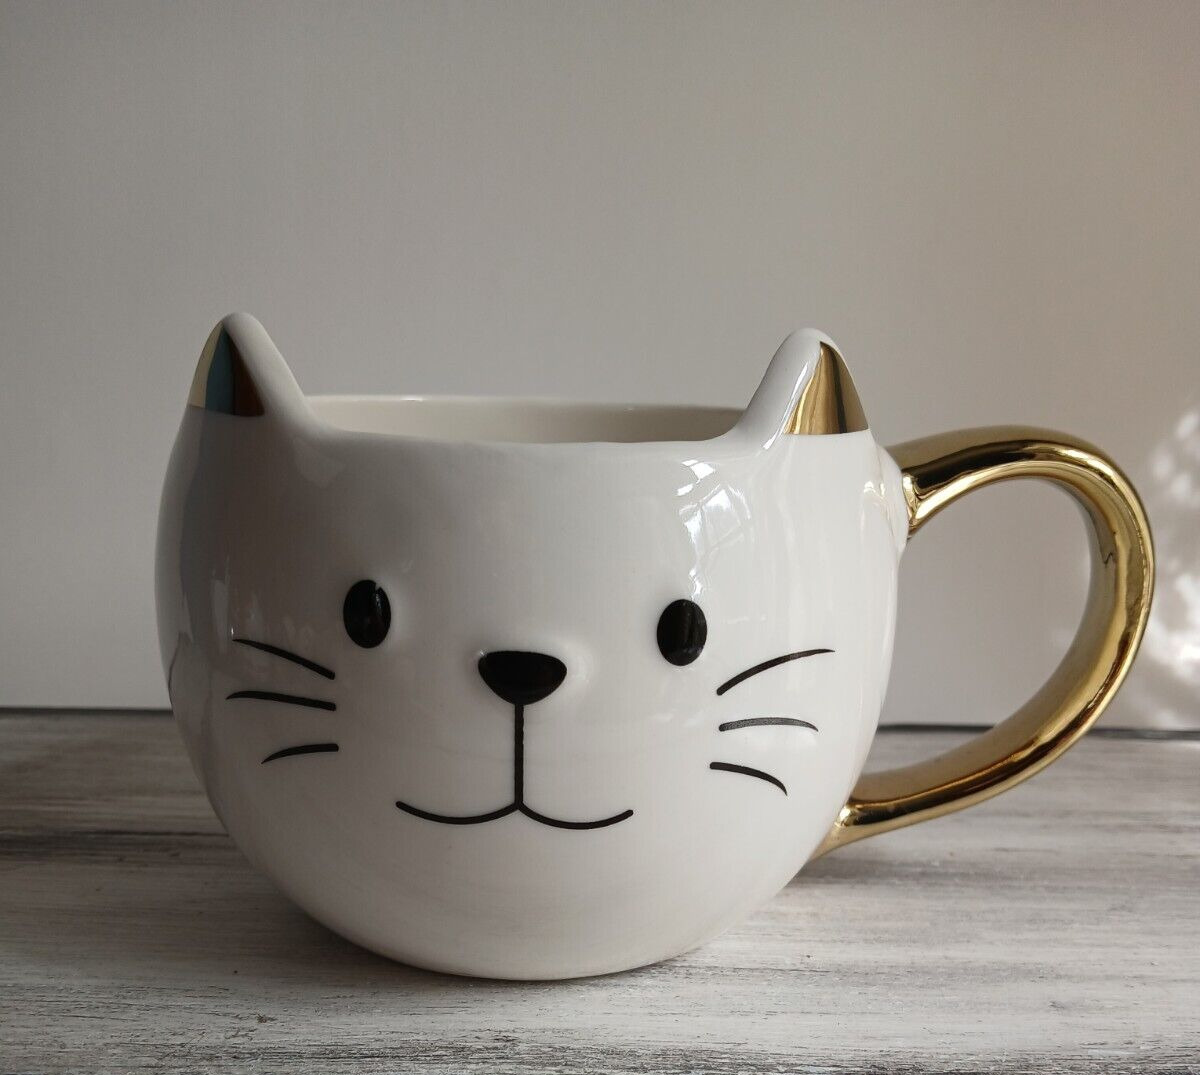 New Large Ceramic White Gold Kitty Cat Coffee Cup Mug Soup Cereal Bowl 17 fl oz